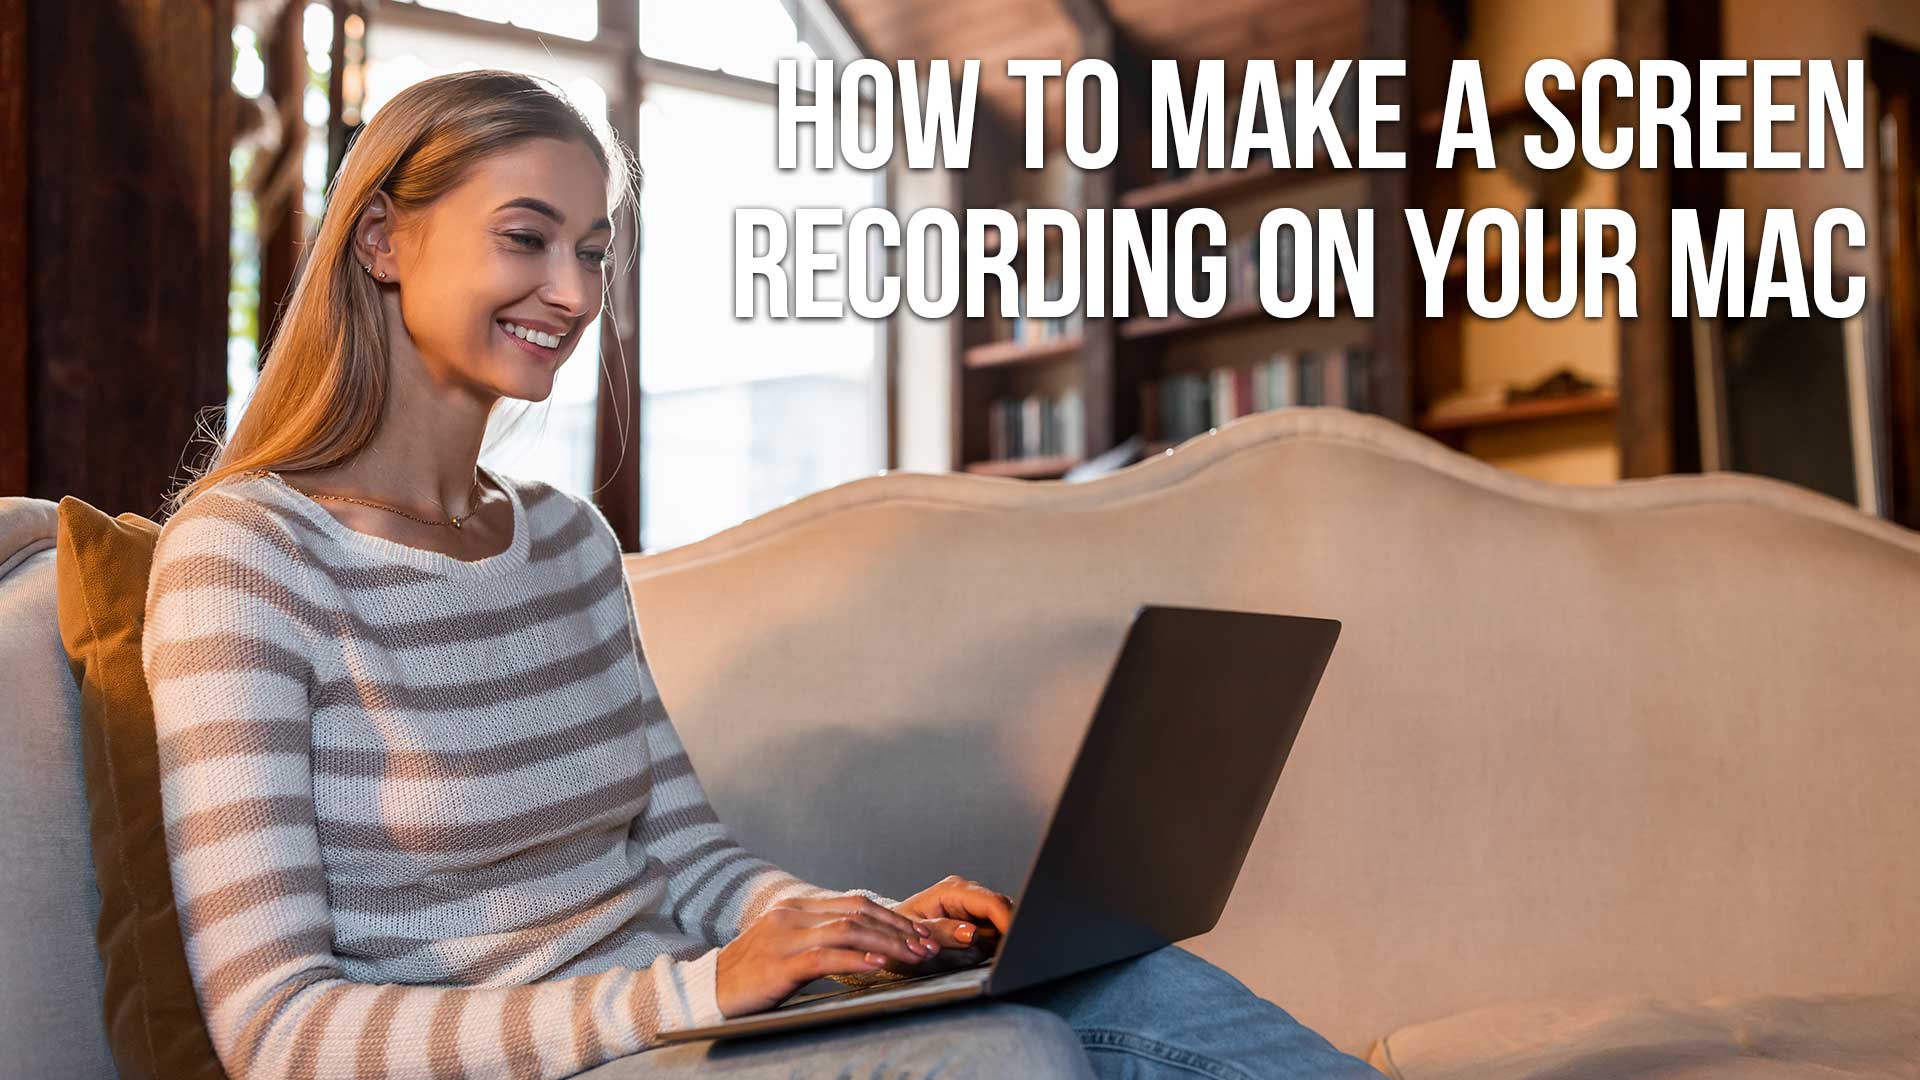 how to record your screen on a mac